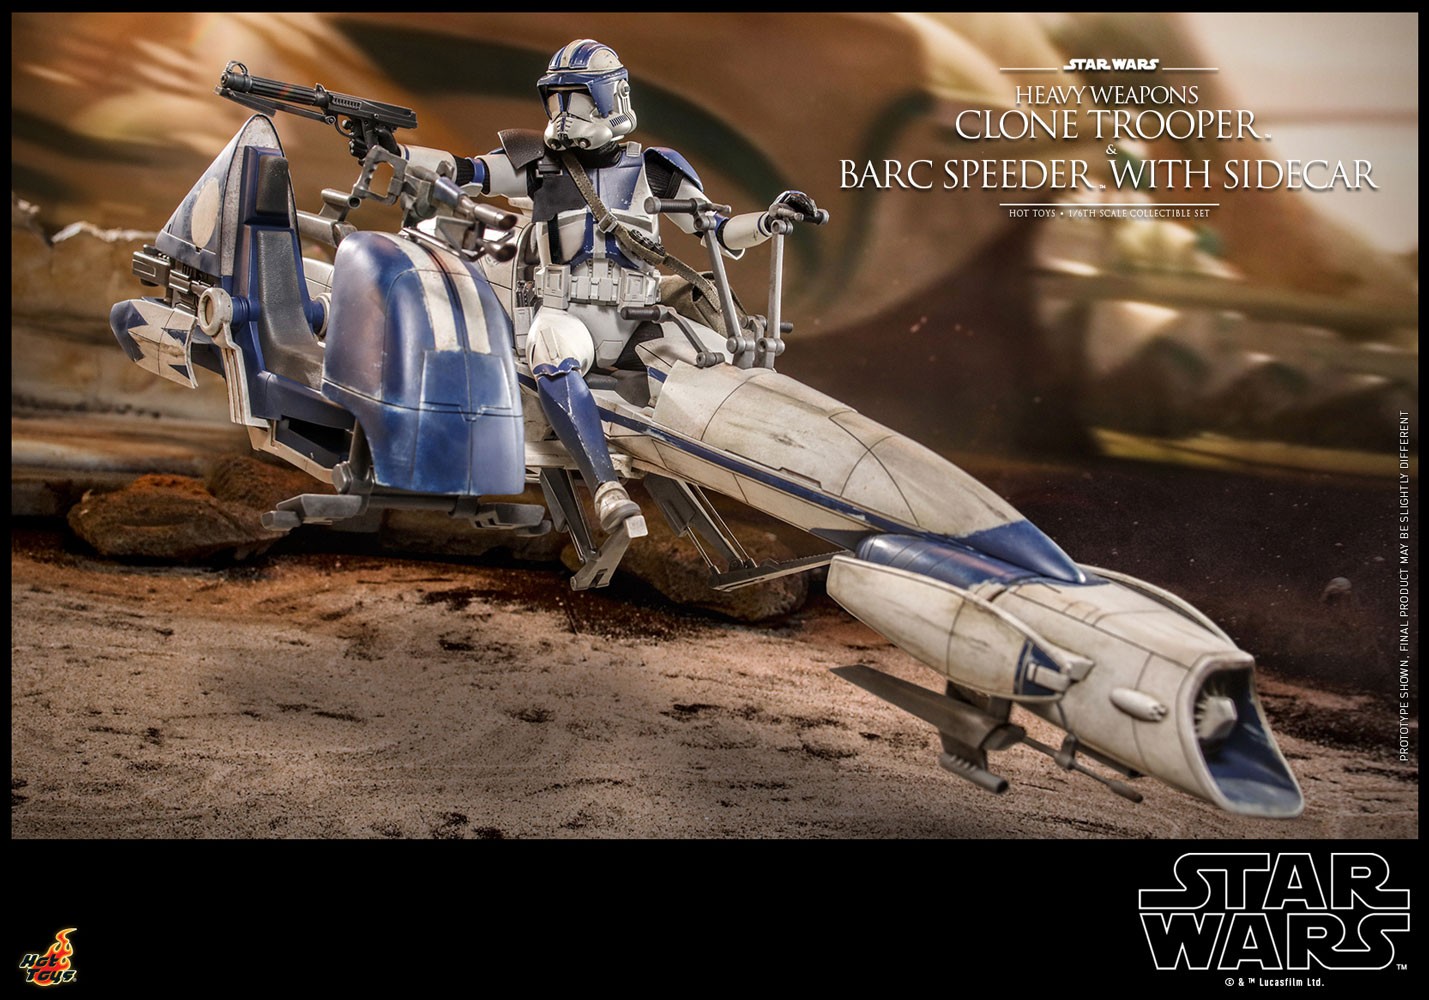 Heavy Weapons Clone Trooper and BARC Speeder with Sidecar